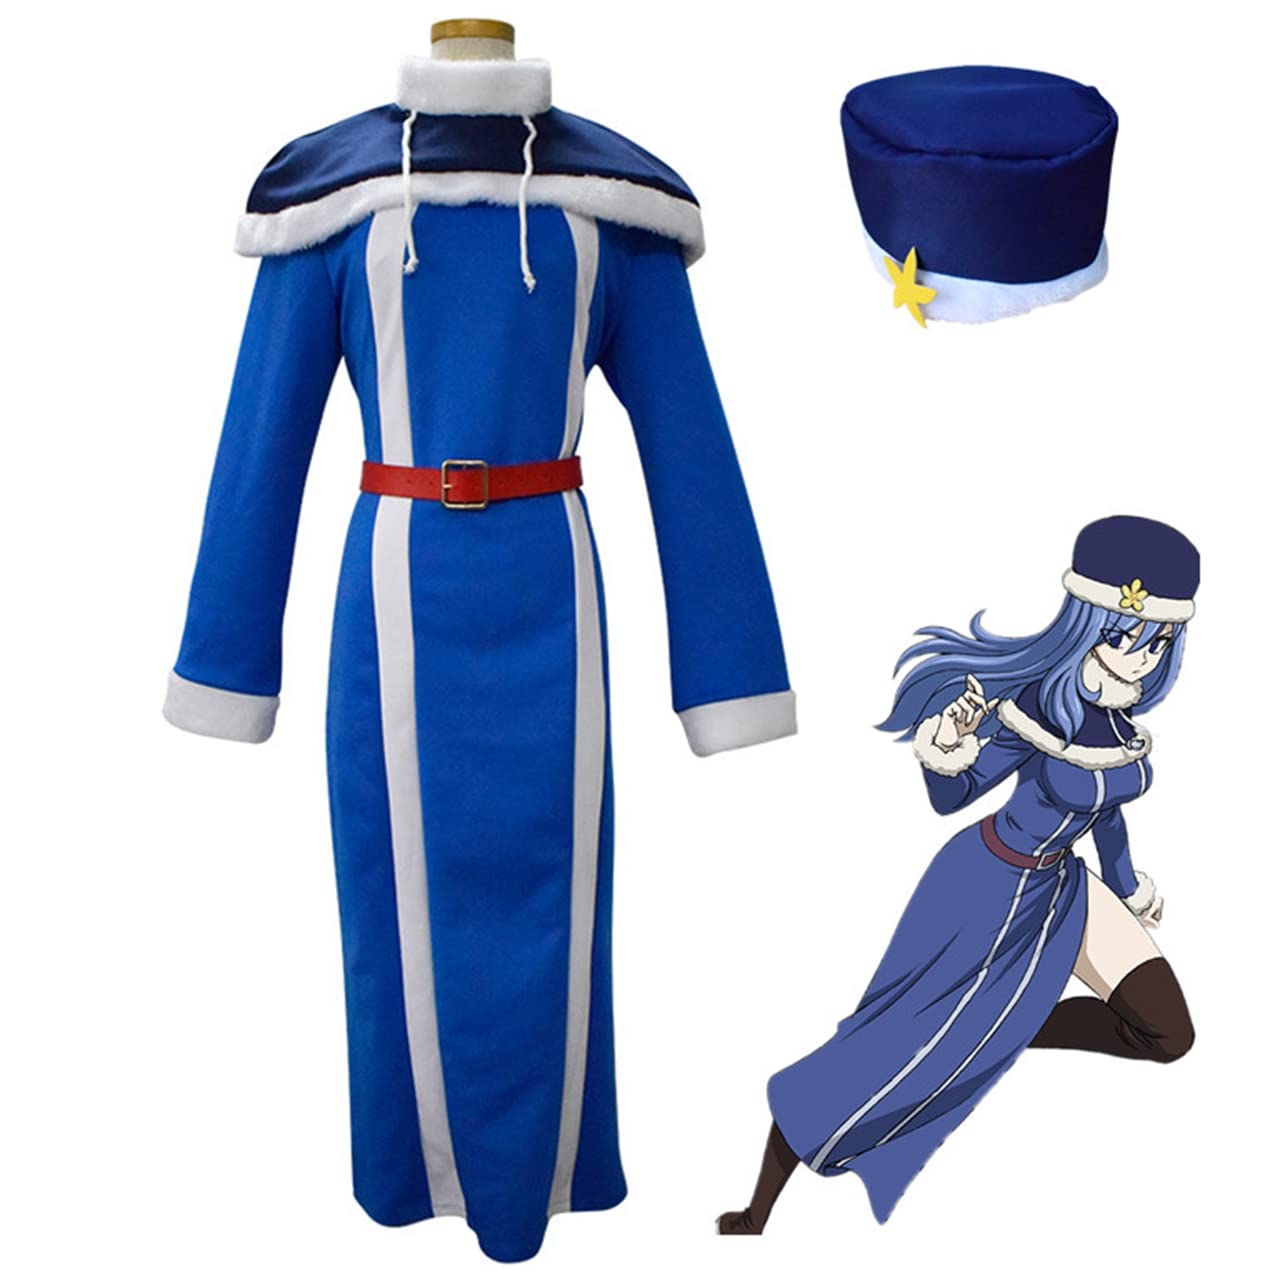 Fairy Tail Costumes, Fairy Tail Cosplay Costumes, Cheap Fairy Tail Costumes,  Buy Fairy Tail Costumes, Fairy Tail Cosplay